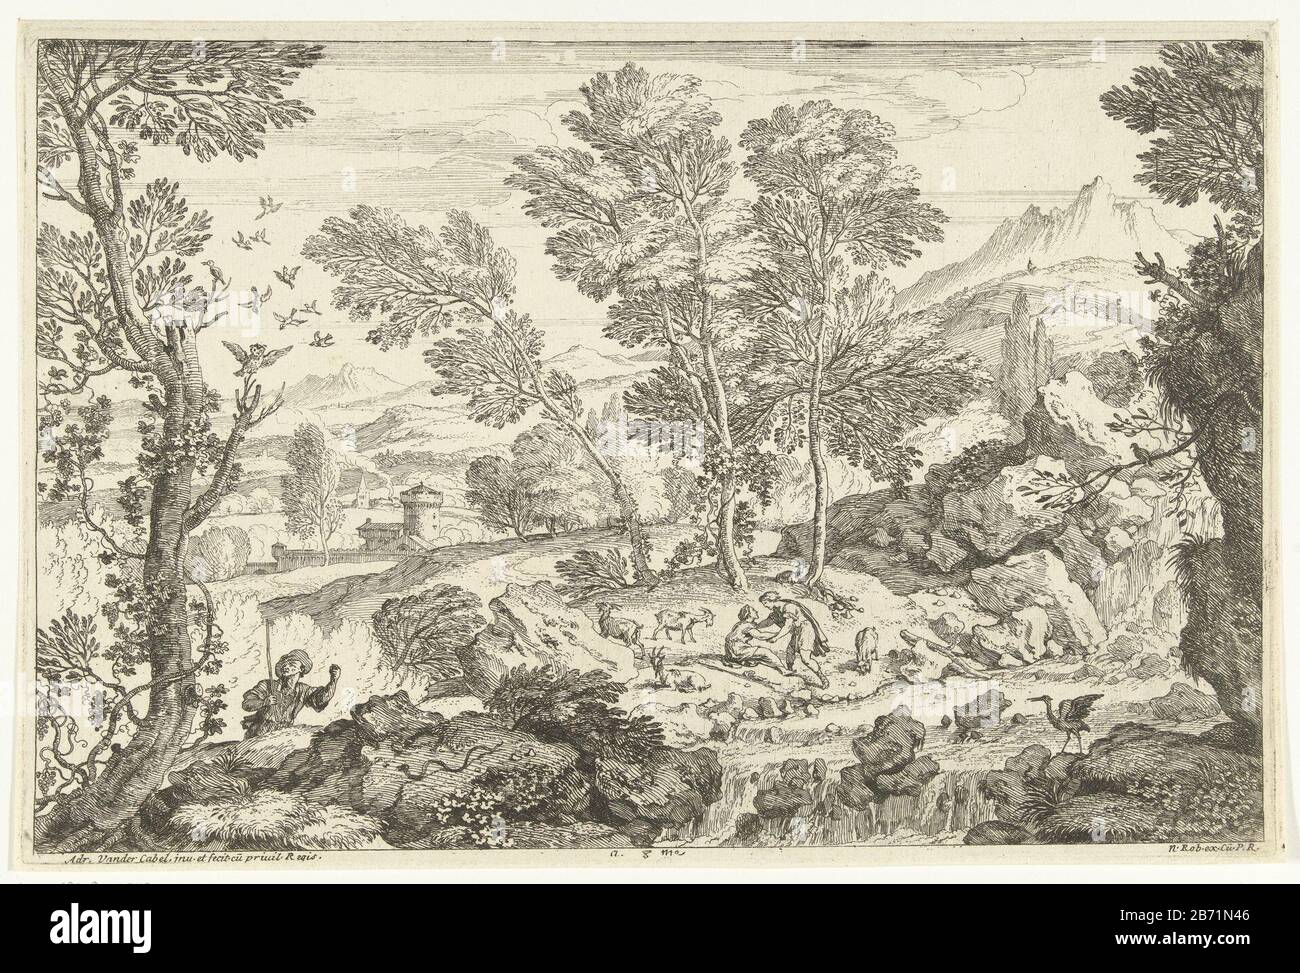 Landschap met waterval en diverse dieren (serietitel) De uil Landschappen, serie zeven (serietitel) Landscape with the foreground, left, a man with stick looking up at a tree Where: in an owl. On the rock for him a serpent and the waterfall a bird with spread wings. Across the river between two people a few goats. In the background a mountain landscape with different dorpjes. Manufacturer : printmaker: Adriaen van der Cabel (listed building) in its design: Adriaen van der Cabel (listed building) Publisher: Robert N. (listed property) provider of privilege: Louis XIV (king of France) (listed bu Stock Photo